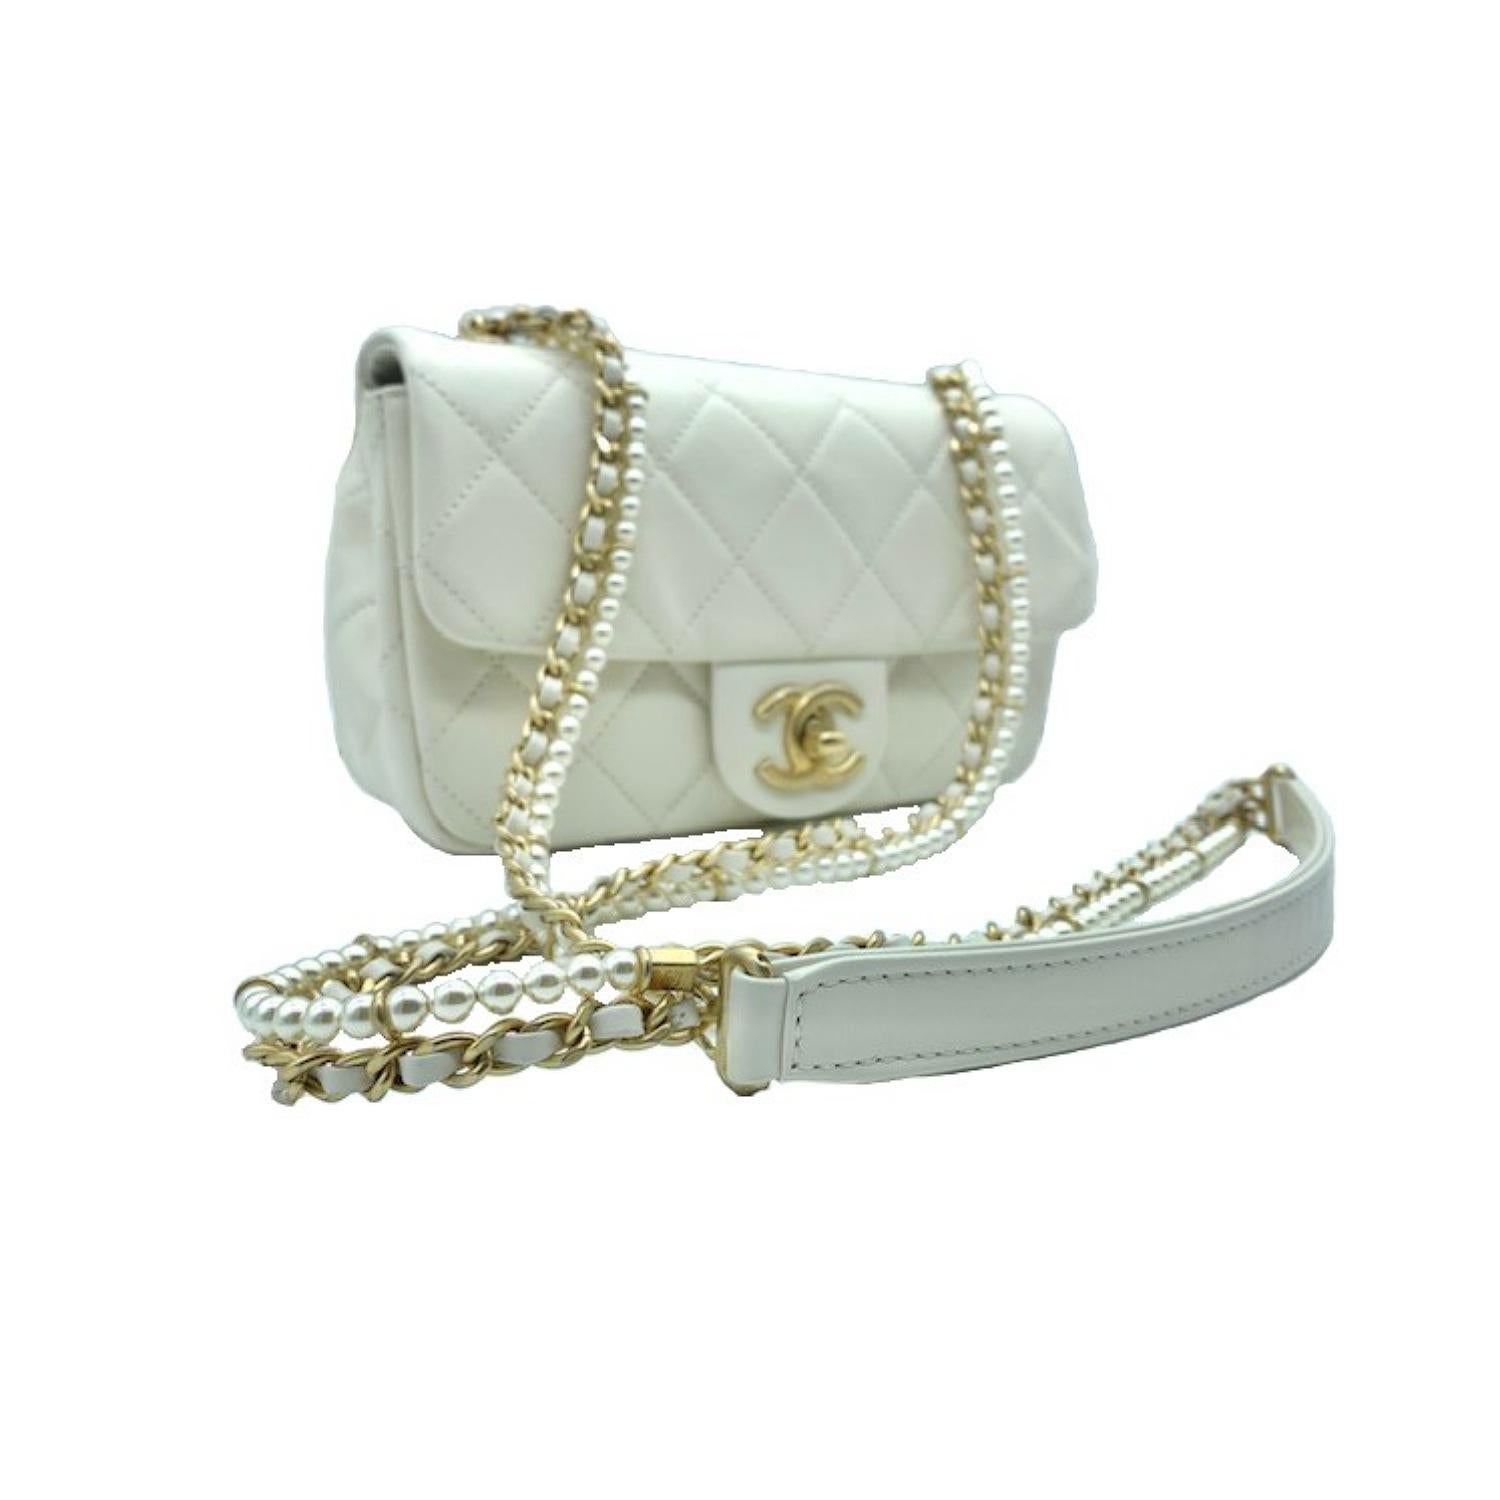 Chanel Calfskin Quilted Mini Rectangular Crystal Pearls Chain Flap. The chic mini crossbody classic is crafted in soft quilted calfskin leather in off-white. The bag features a gold chain link leather threaded shoulder strap with pearl accents and a